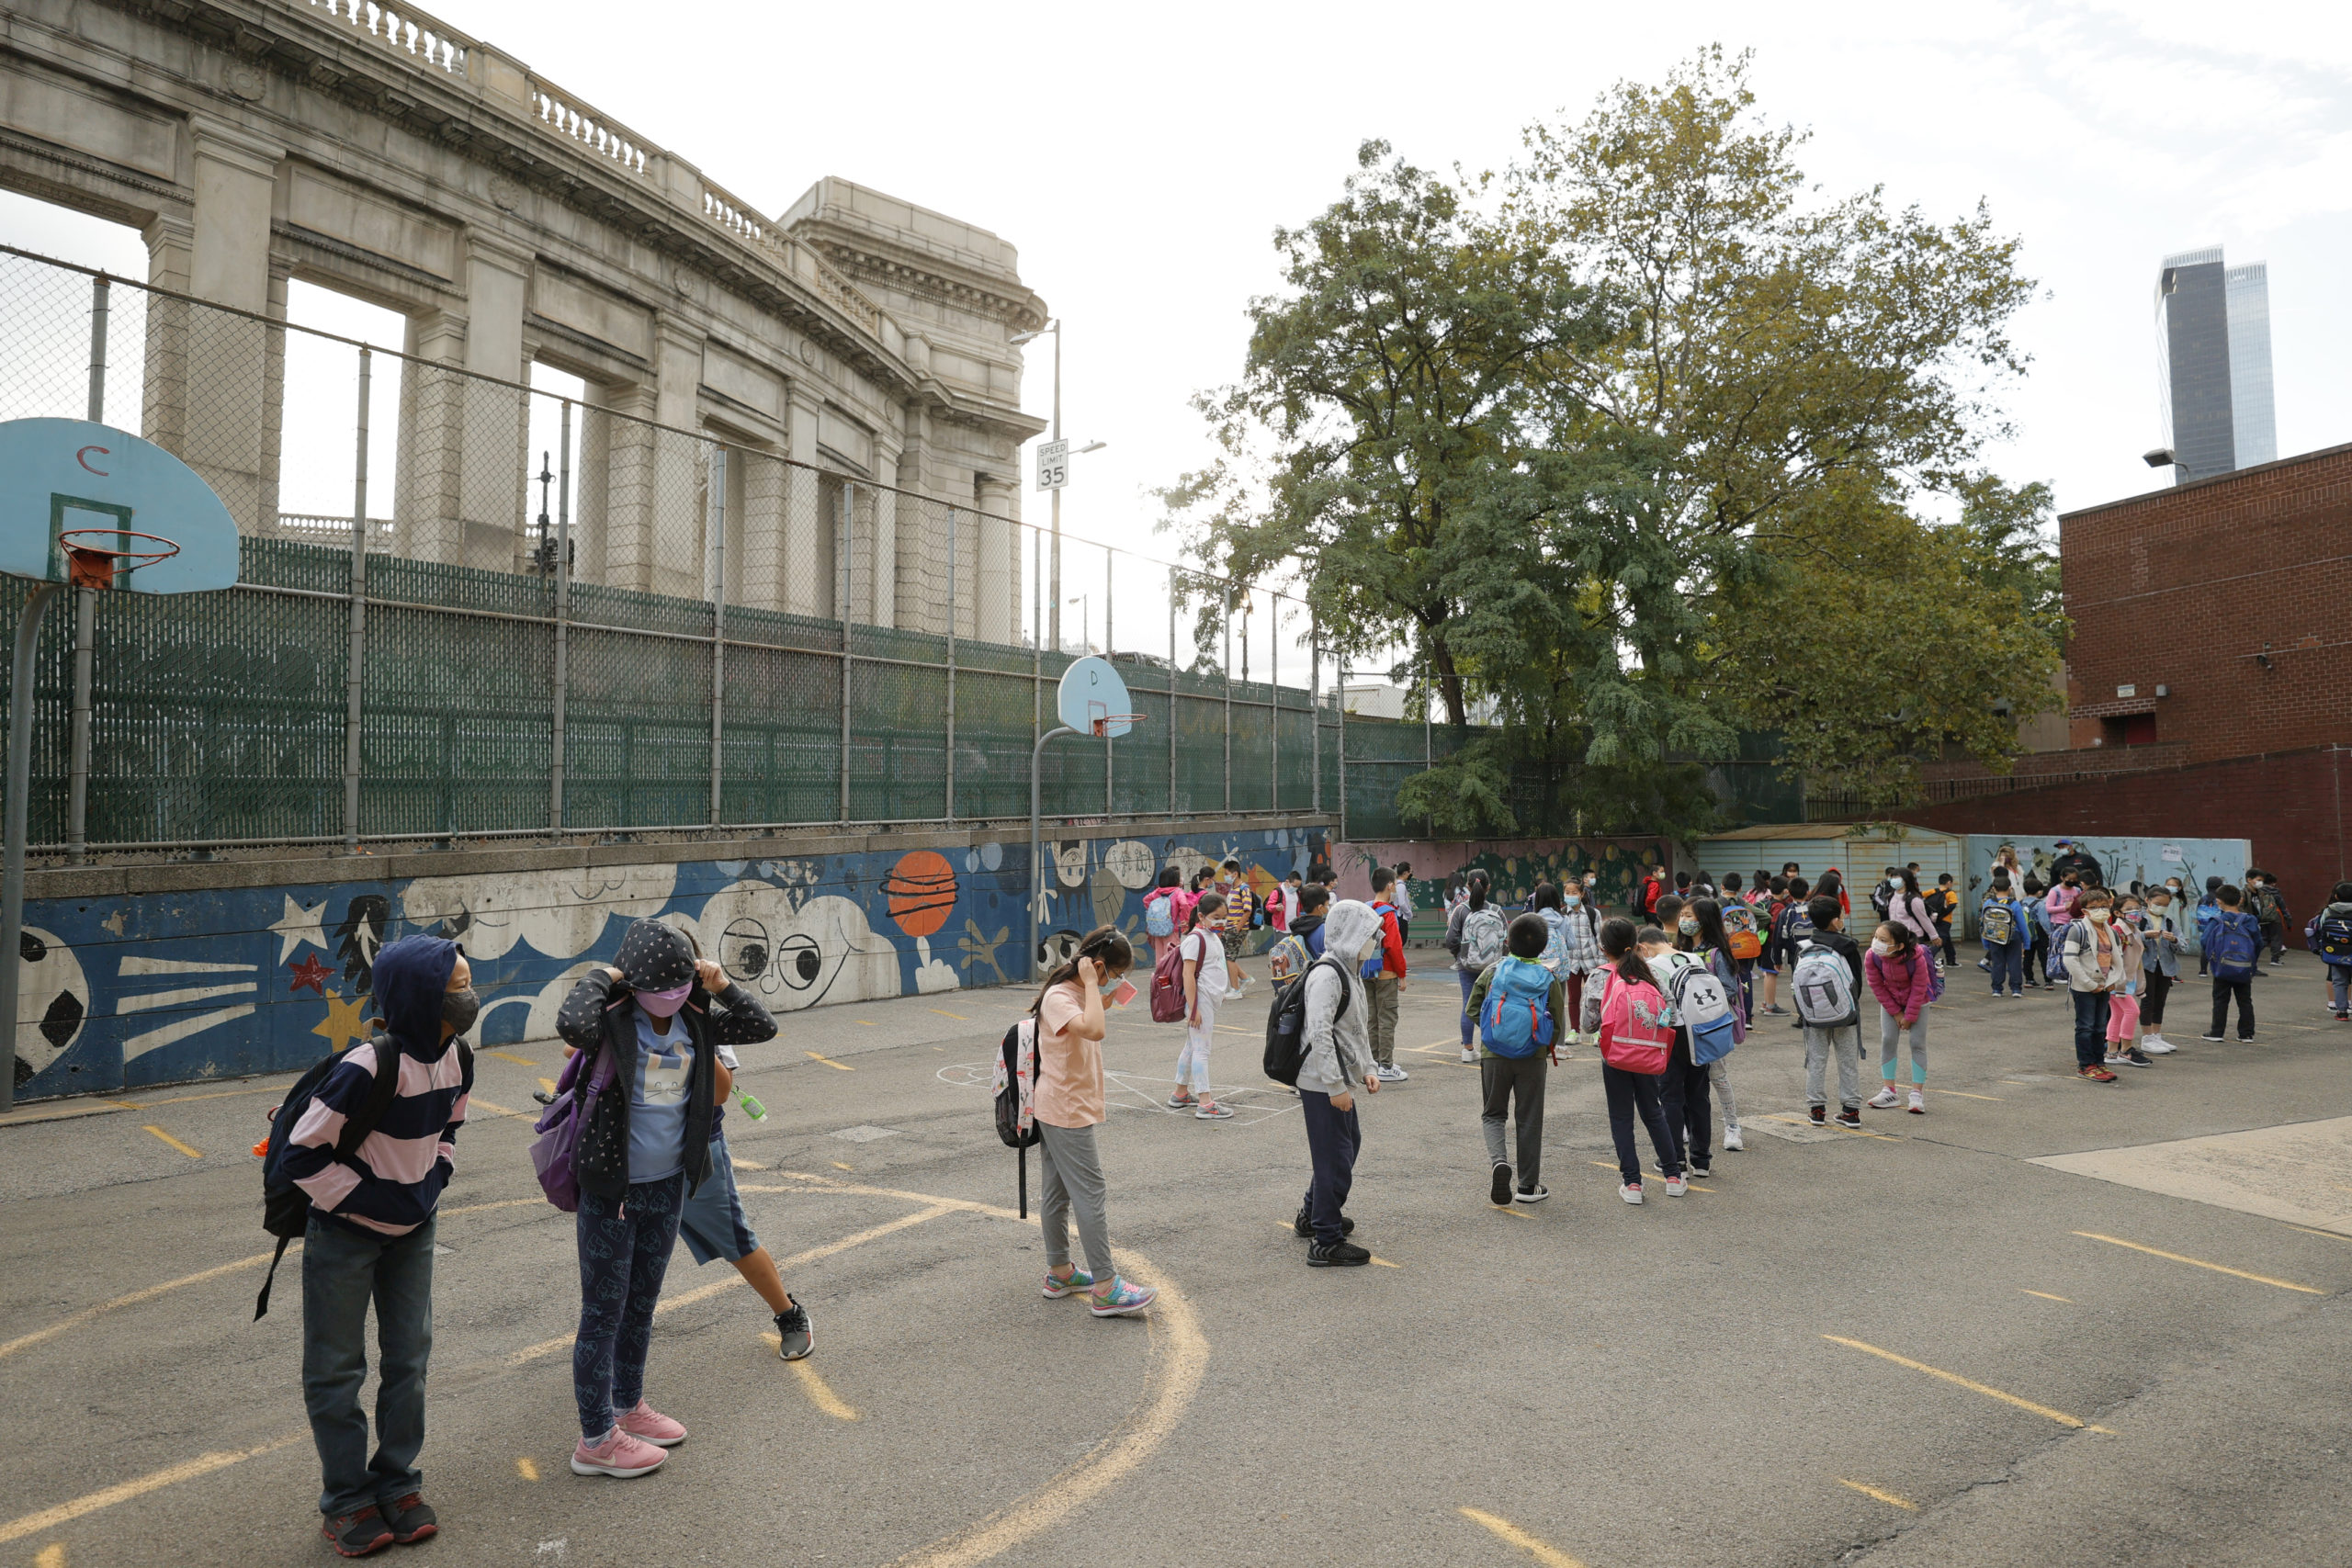 Students line up in the morning at Yung Wing School P.S. 124 on September 27, 2021 in New York City. New York City schools fully reopened earlier this month with all in-person classrooms and mandatory masks on students. The city's mandate ordering all New York City school staff to be vaccinated by midnight today was delayed again after a federal appeals court issued a temporary injunction three days before the mayor's deadline. (Photo by Michael Loccisano/Getty Images)